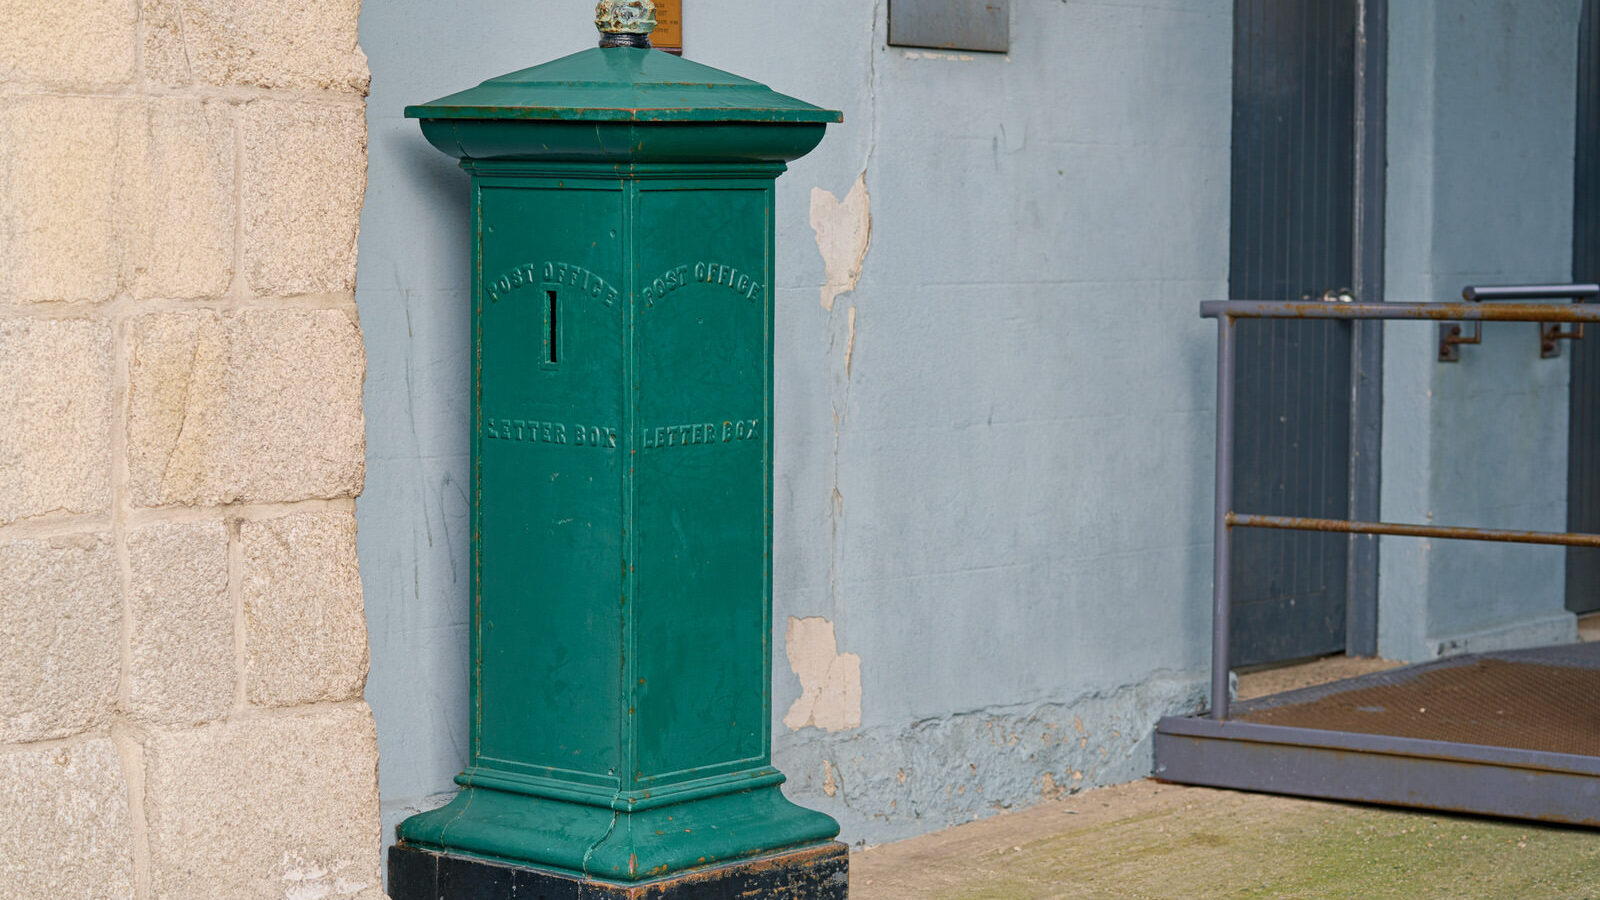 TELL ME ABOUT THE OLDEST LETTER BOX IN IRELAND [THIS ONE DATES BACK TO THE 1850s]-228633-1